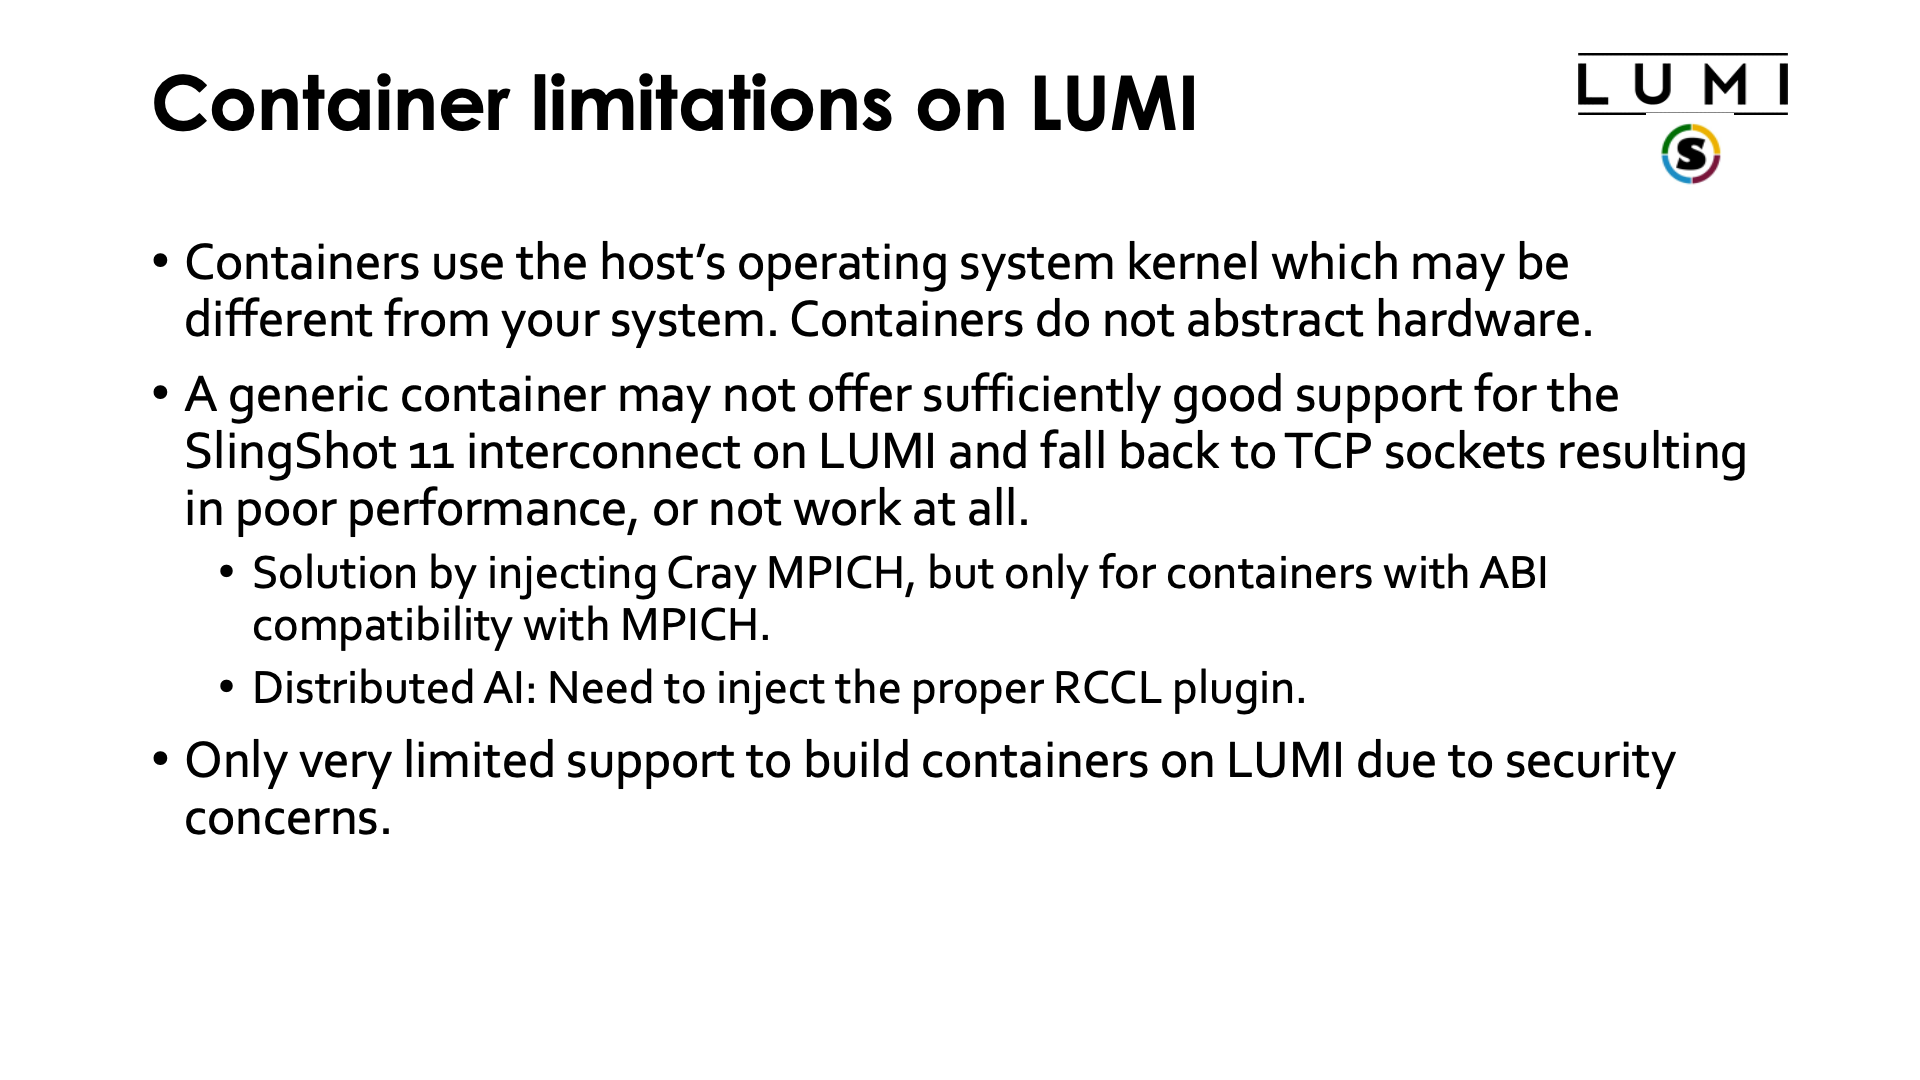 Container limitations on LUMI